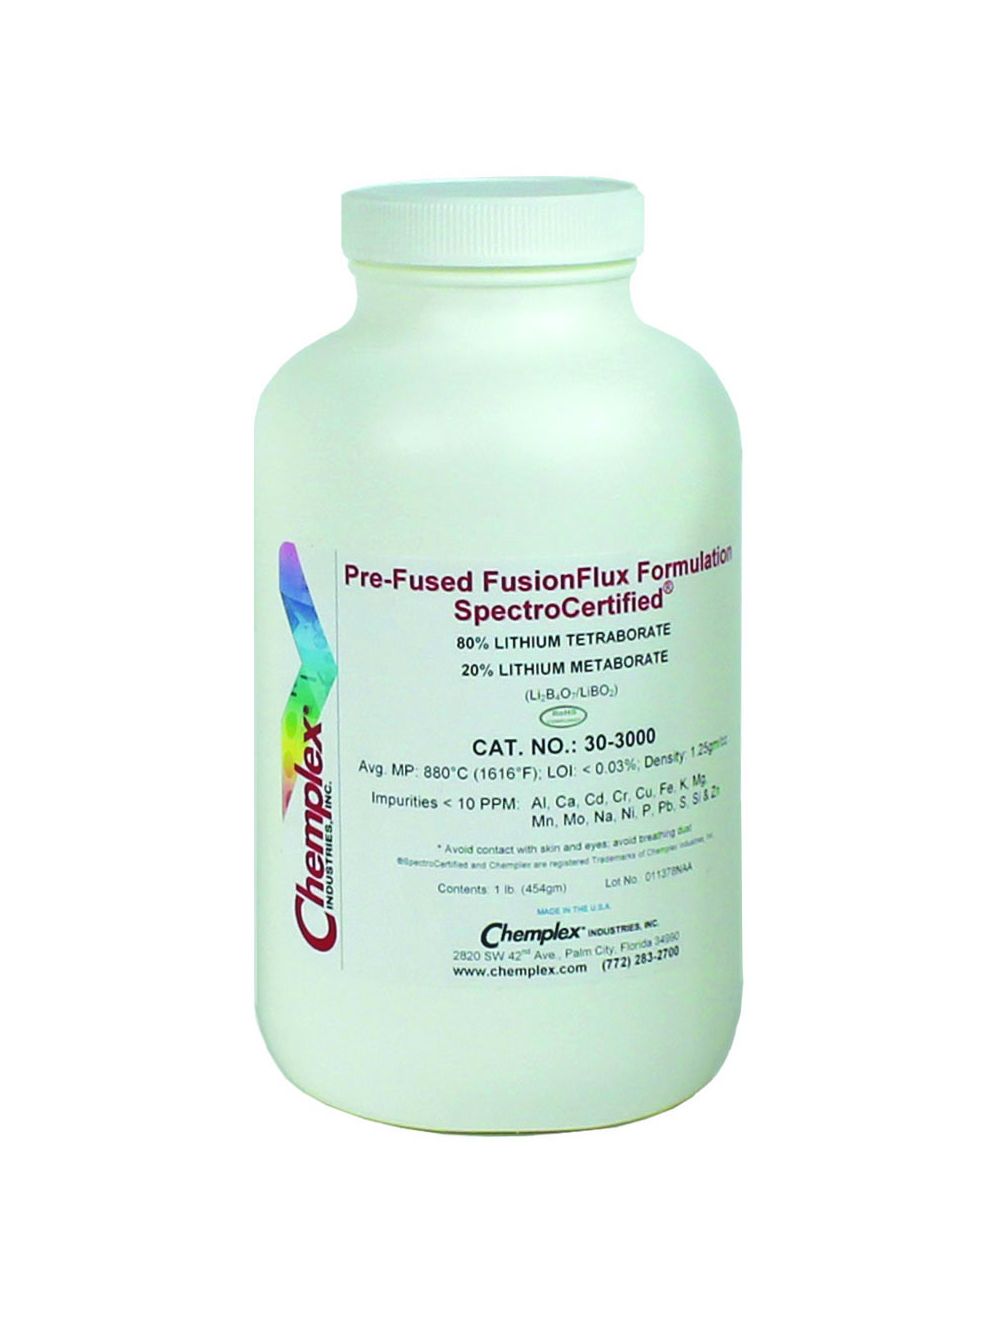 80% Lithium Tetraborate and 20% Lithium Metaborate Chemplex SpectroCertified Pre-Fused FusionFlux 30-3000 Formulation 